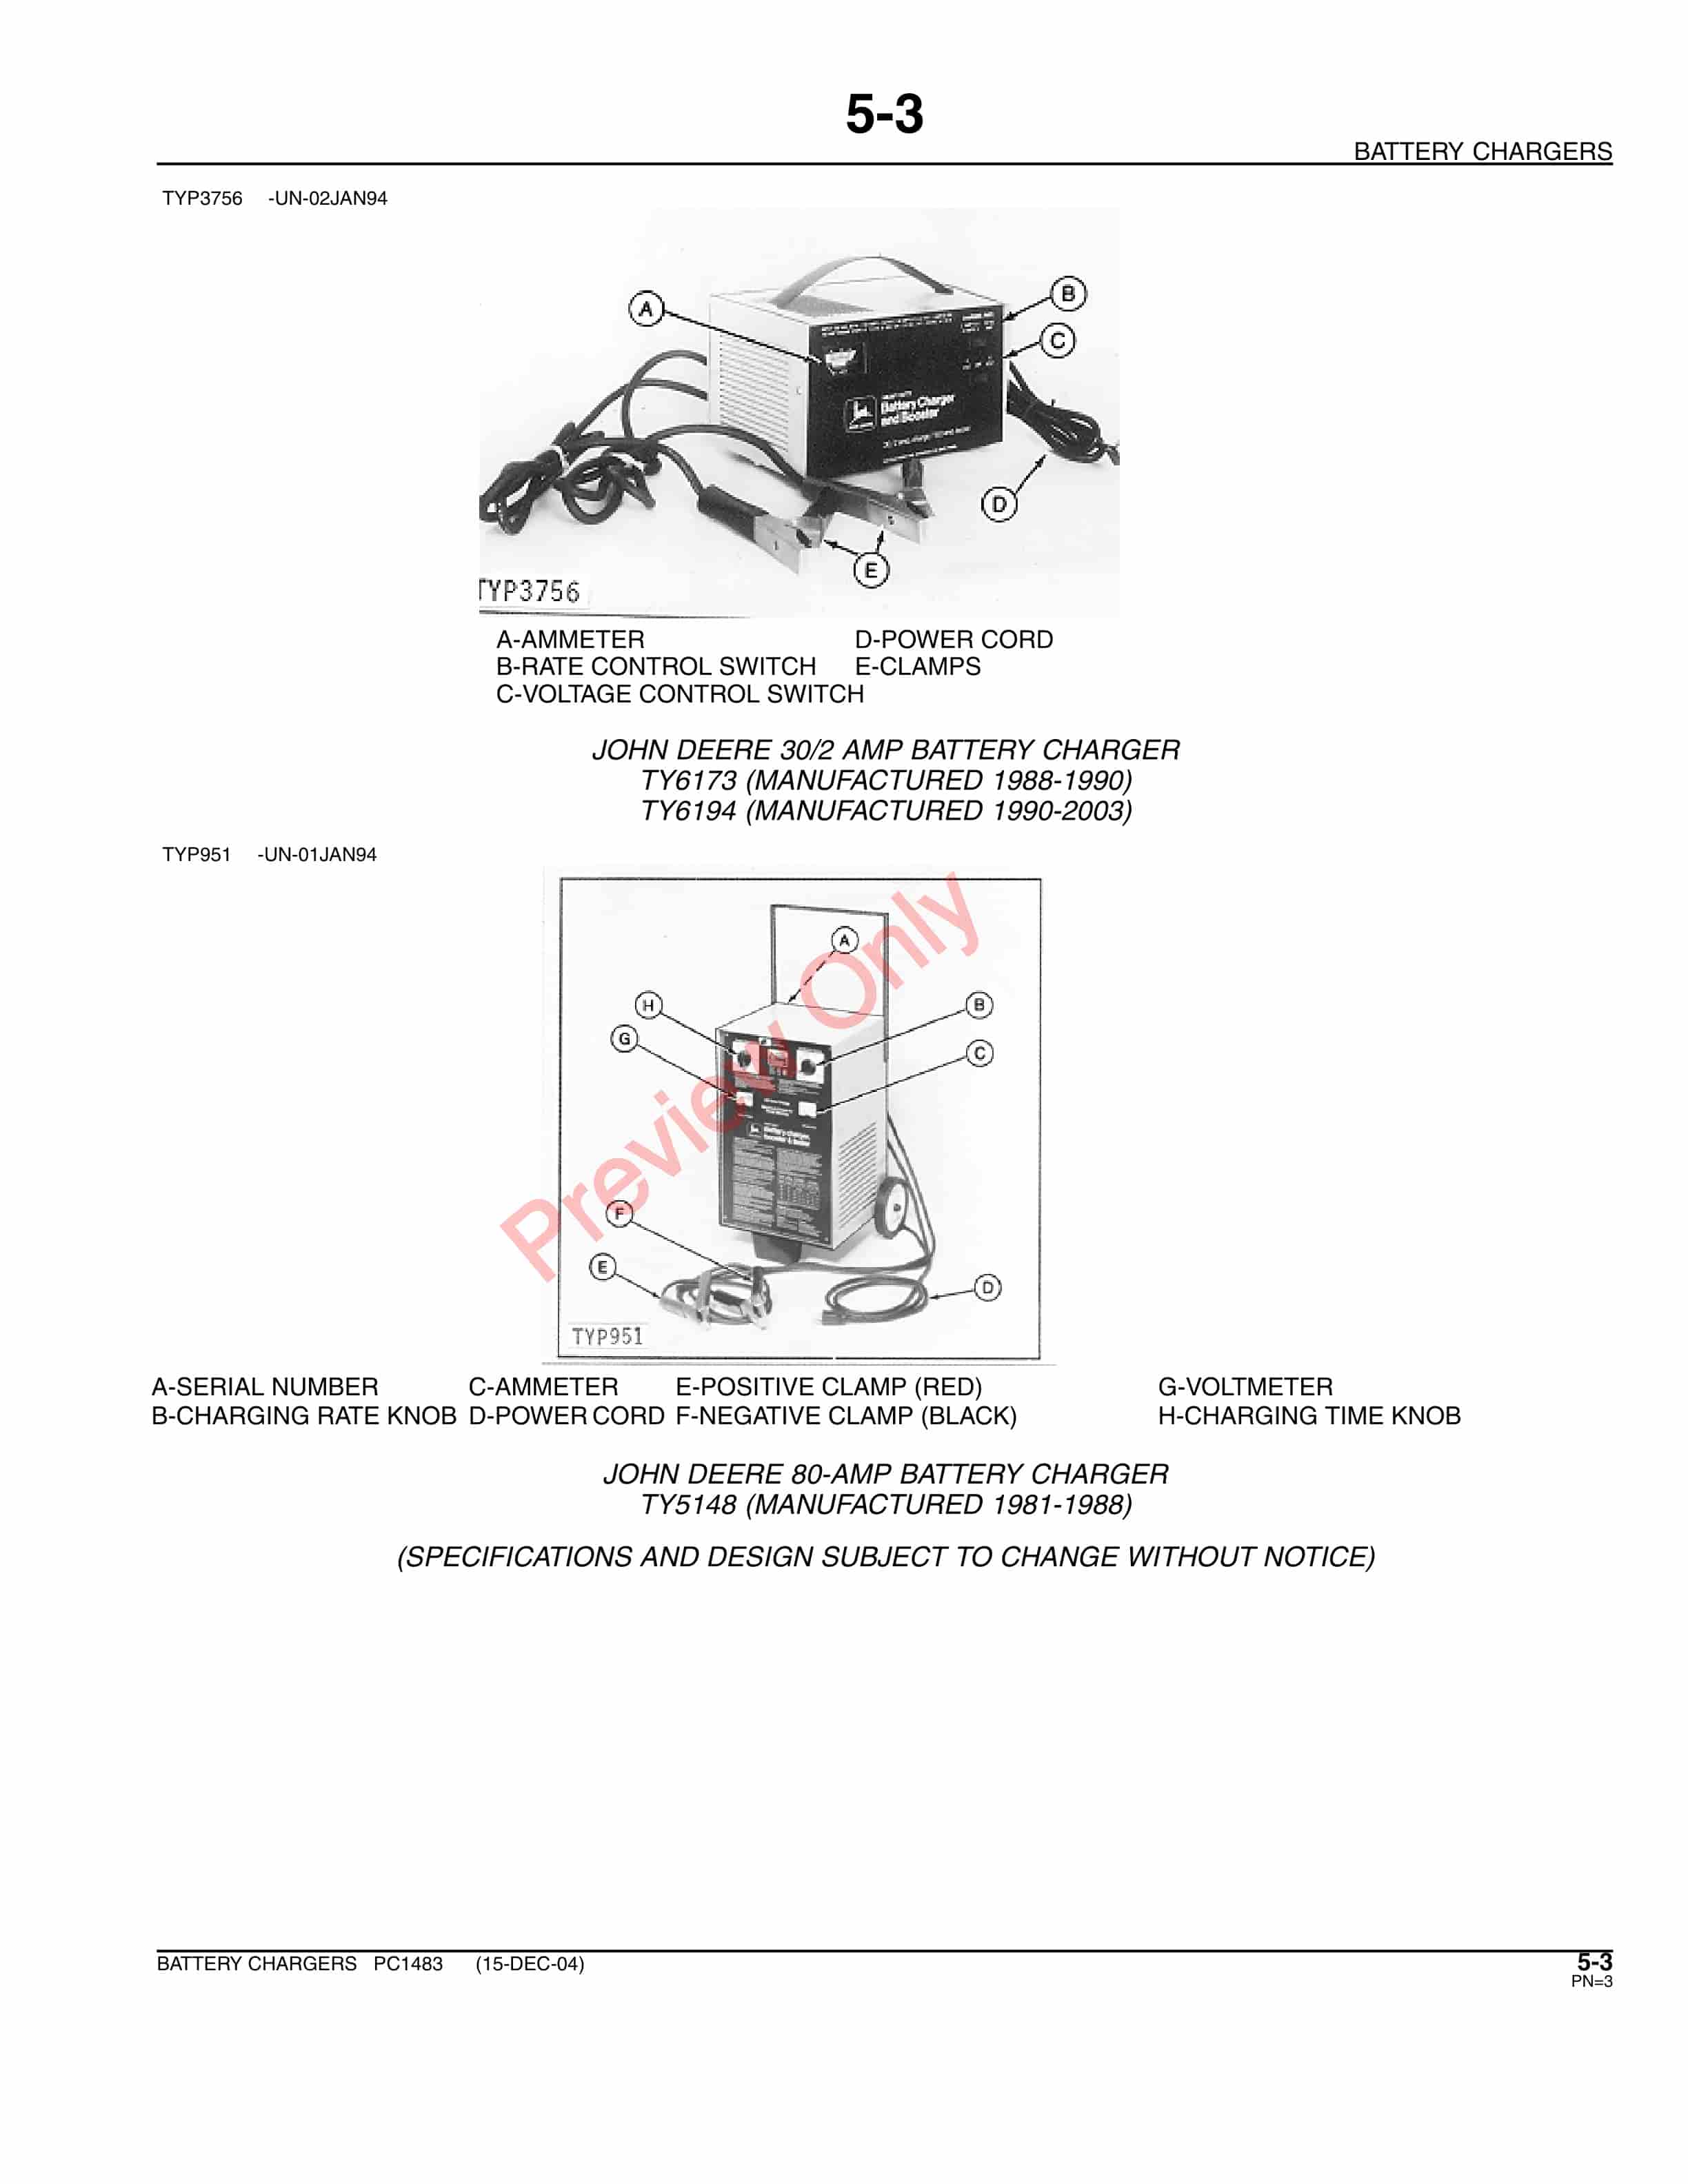 John Deere Battery Chargers and Jump Starter Parts Catalog PC1483 18MAY05-5